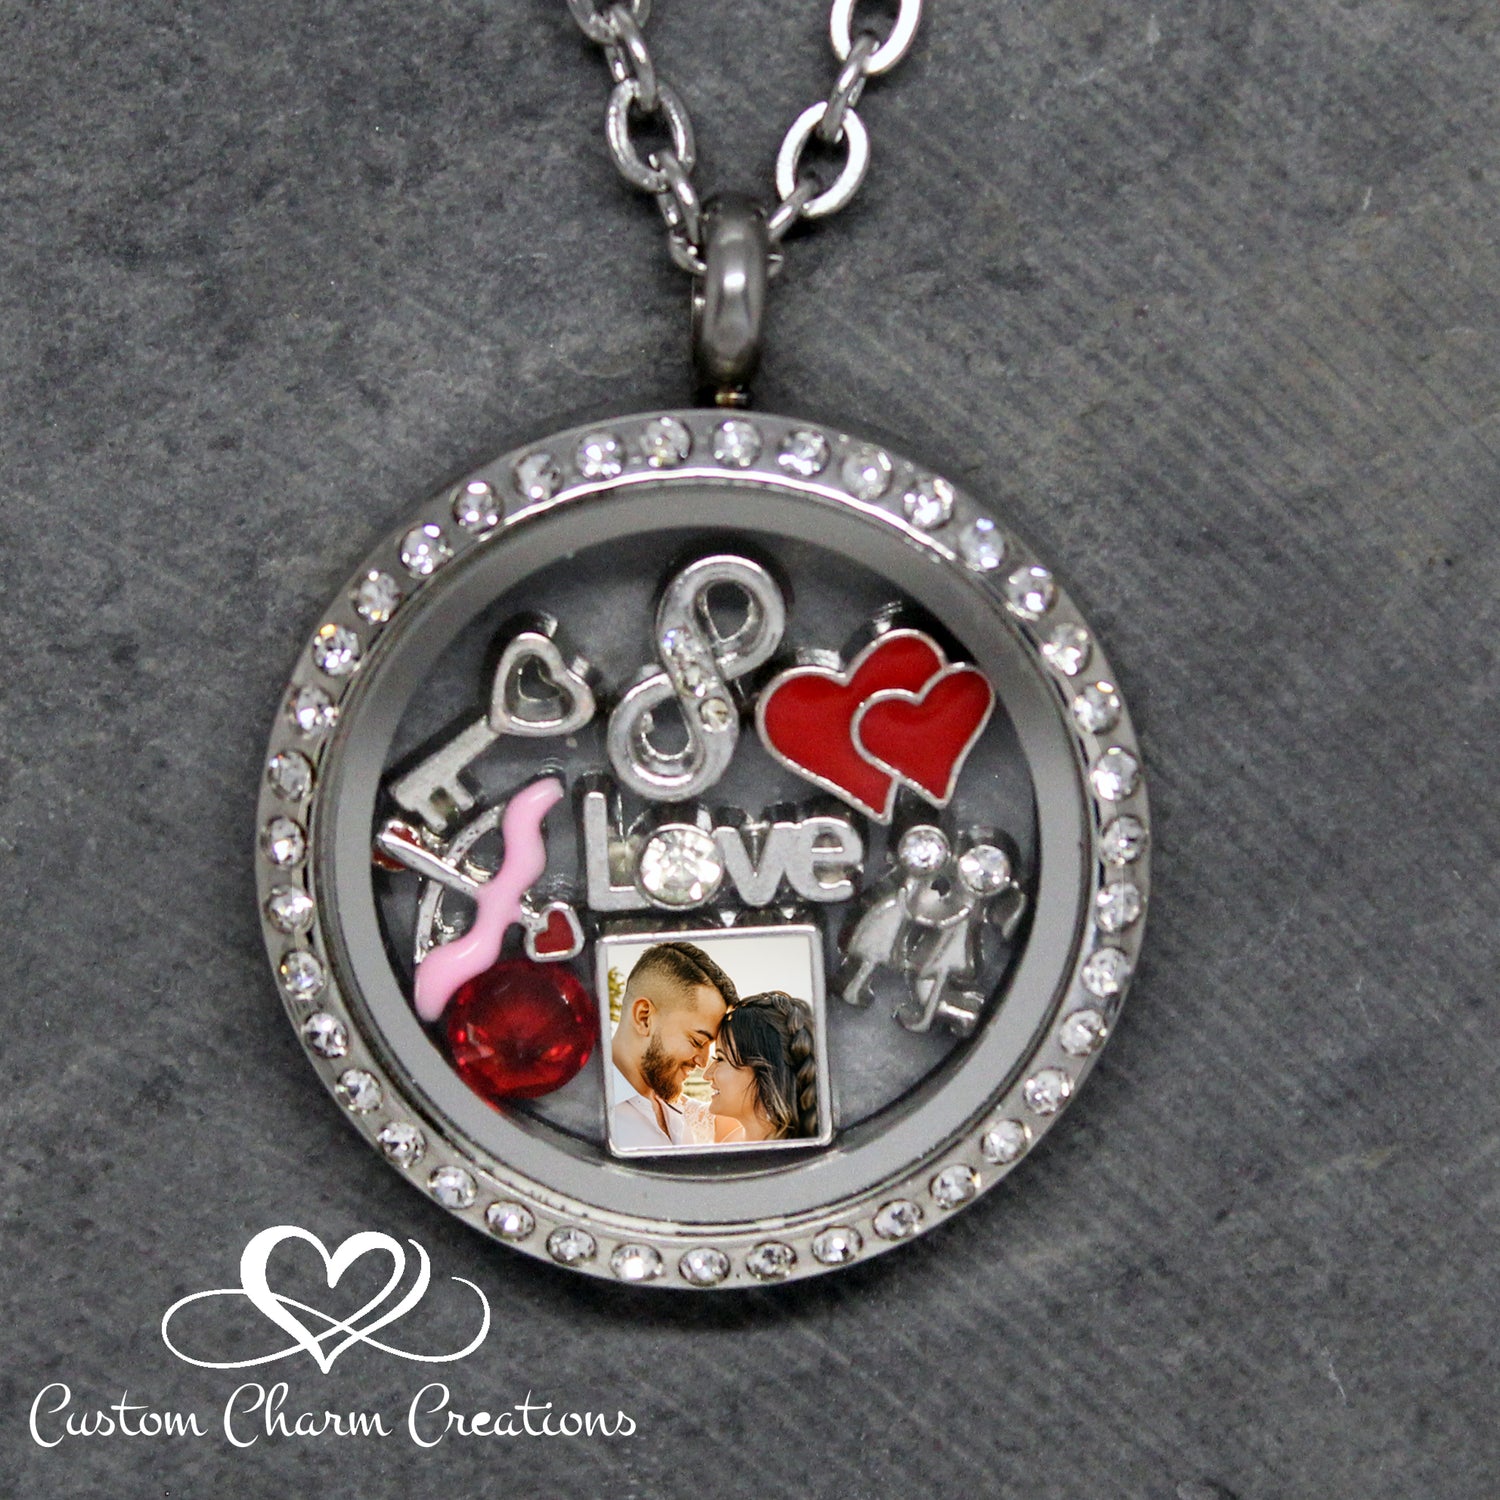 You Have the Key to My Heart ♡ Valentine's Day Personalized